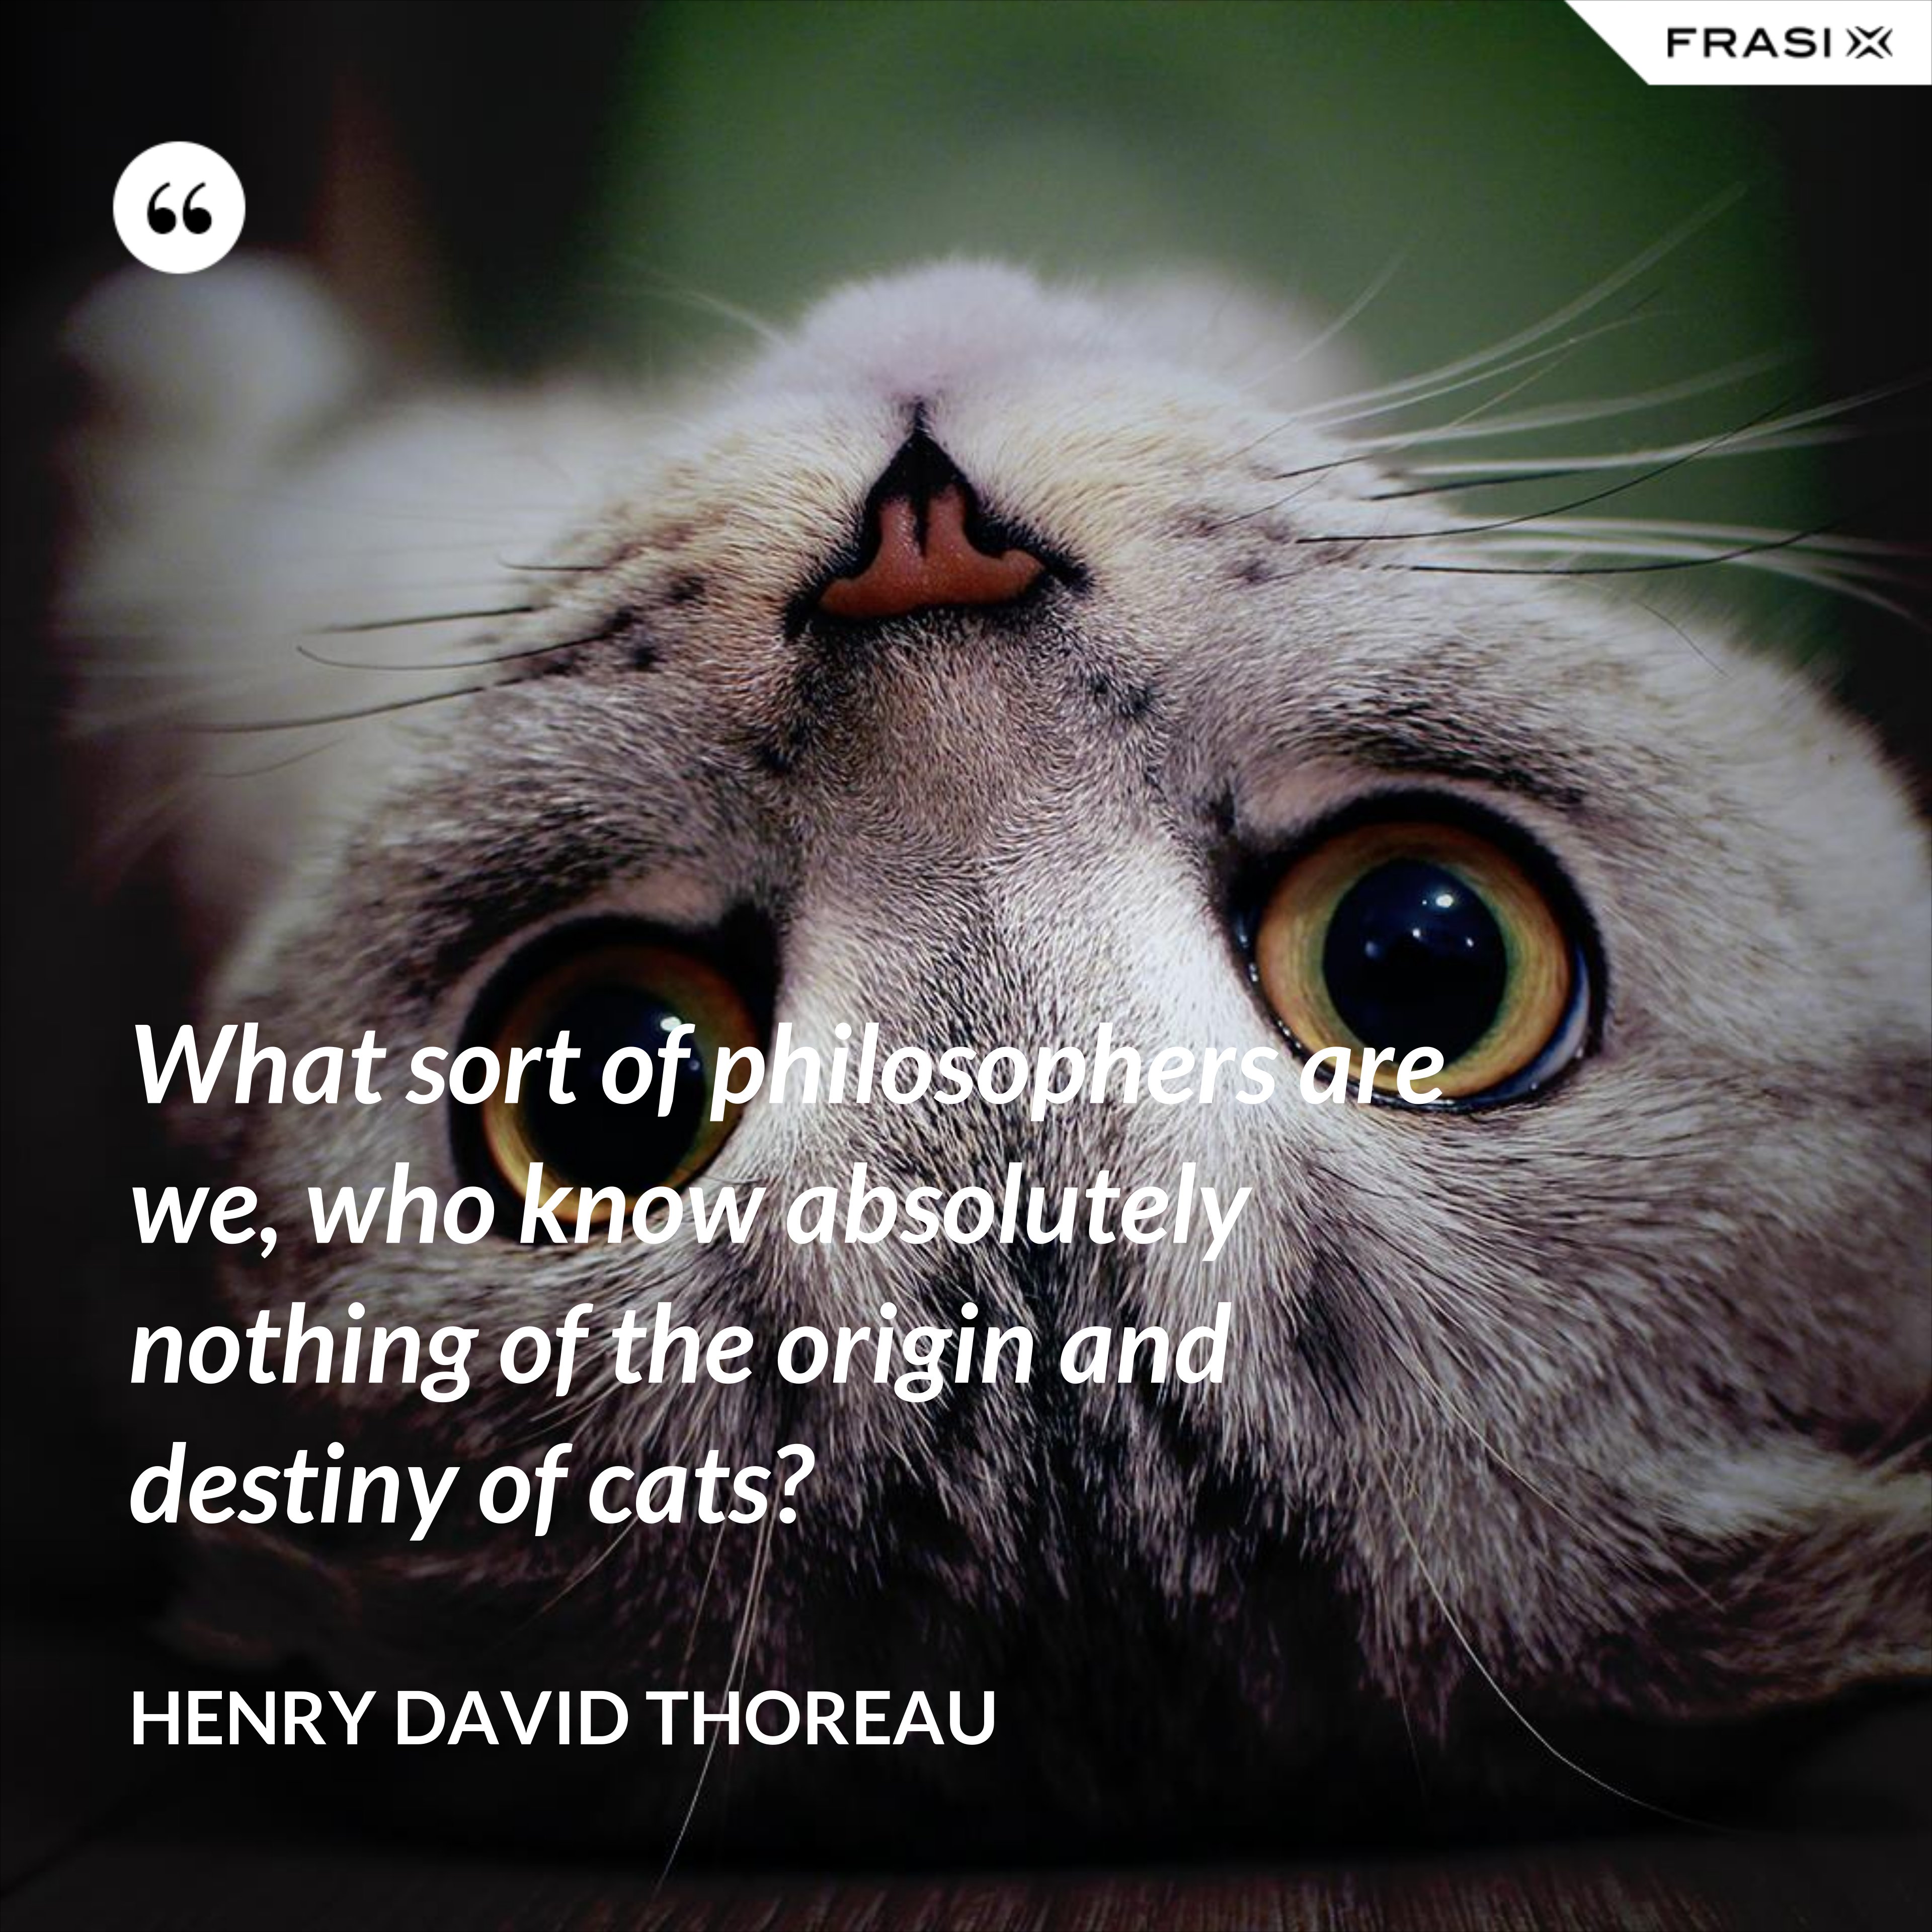 What sort of philosophers are we, who know absolutely nothing of the origin and destiny of cats? - Henry David Thoreau